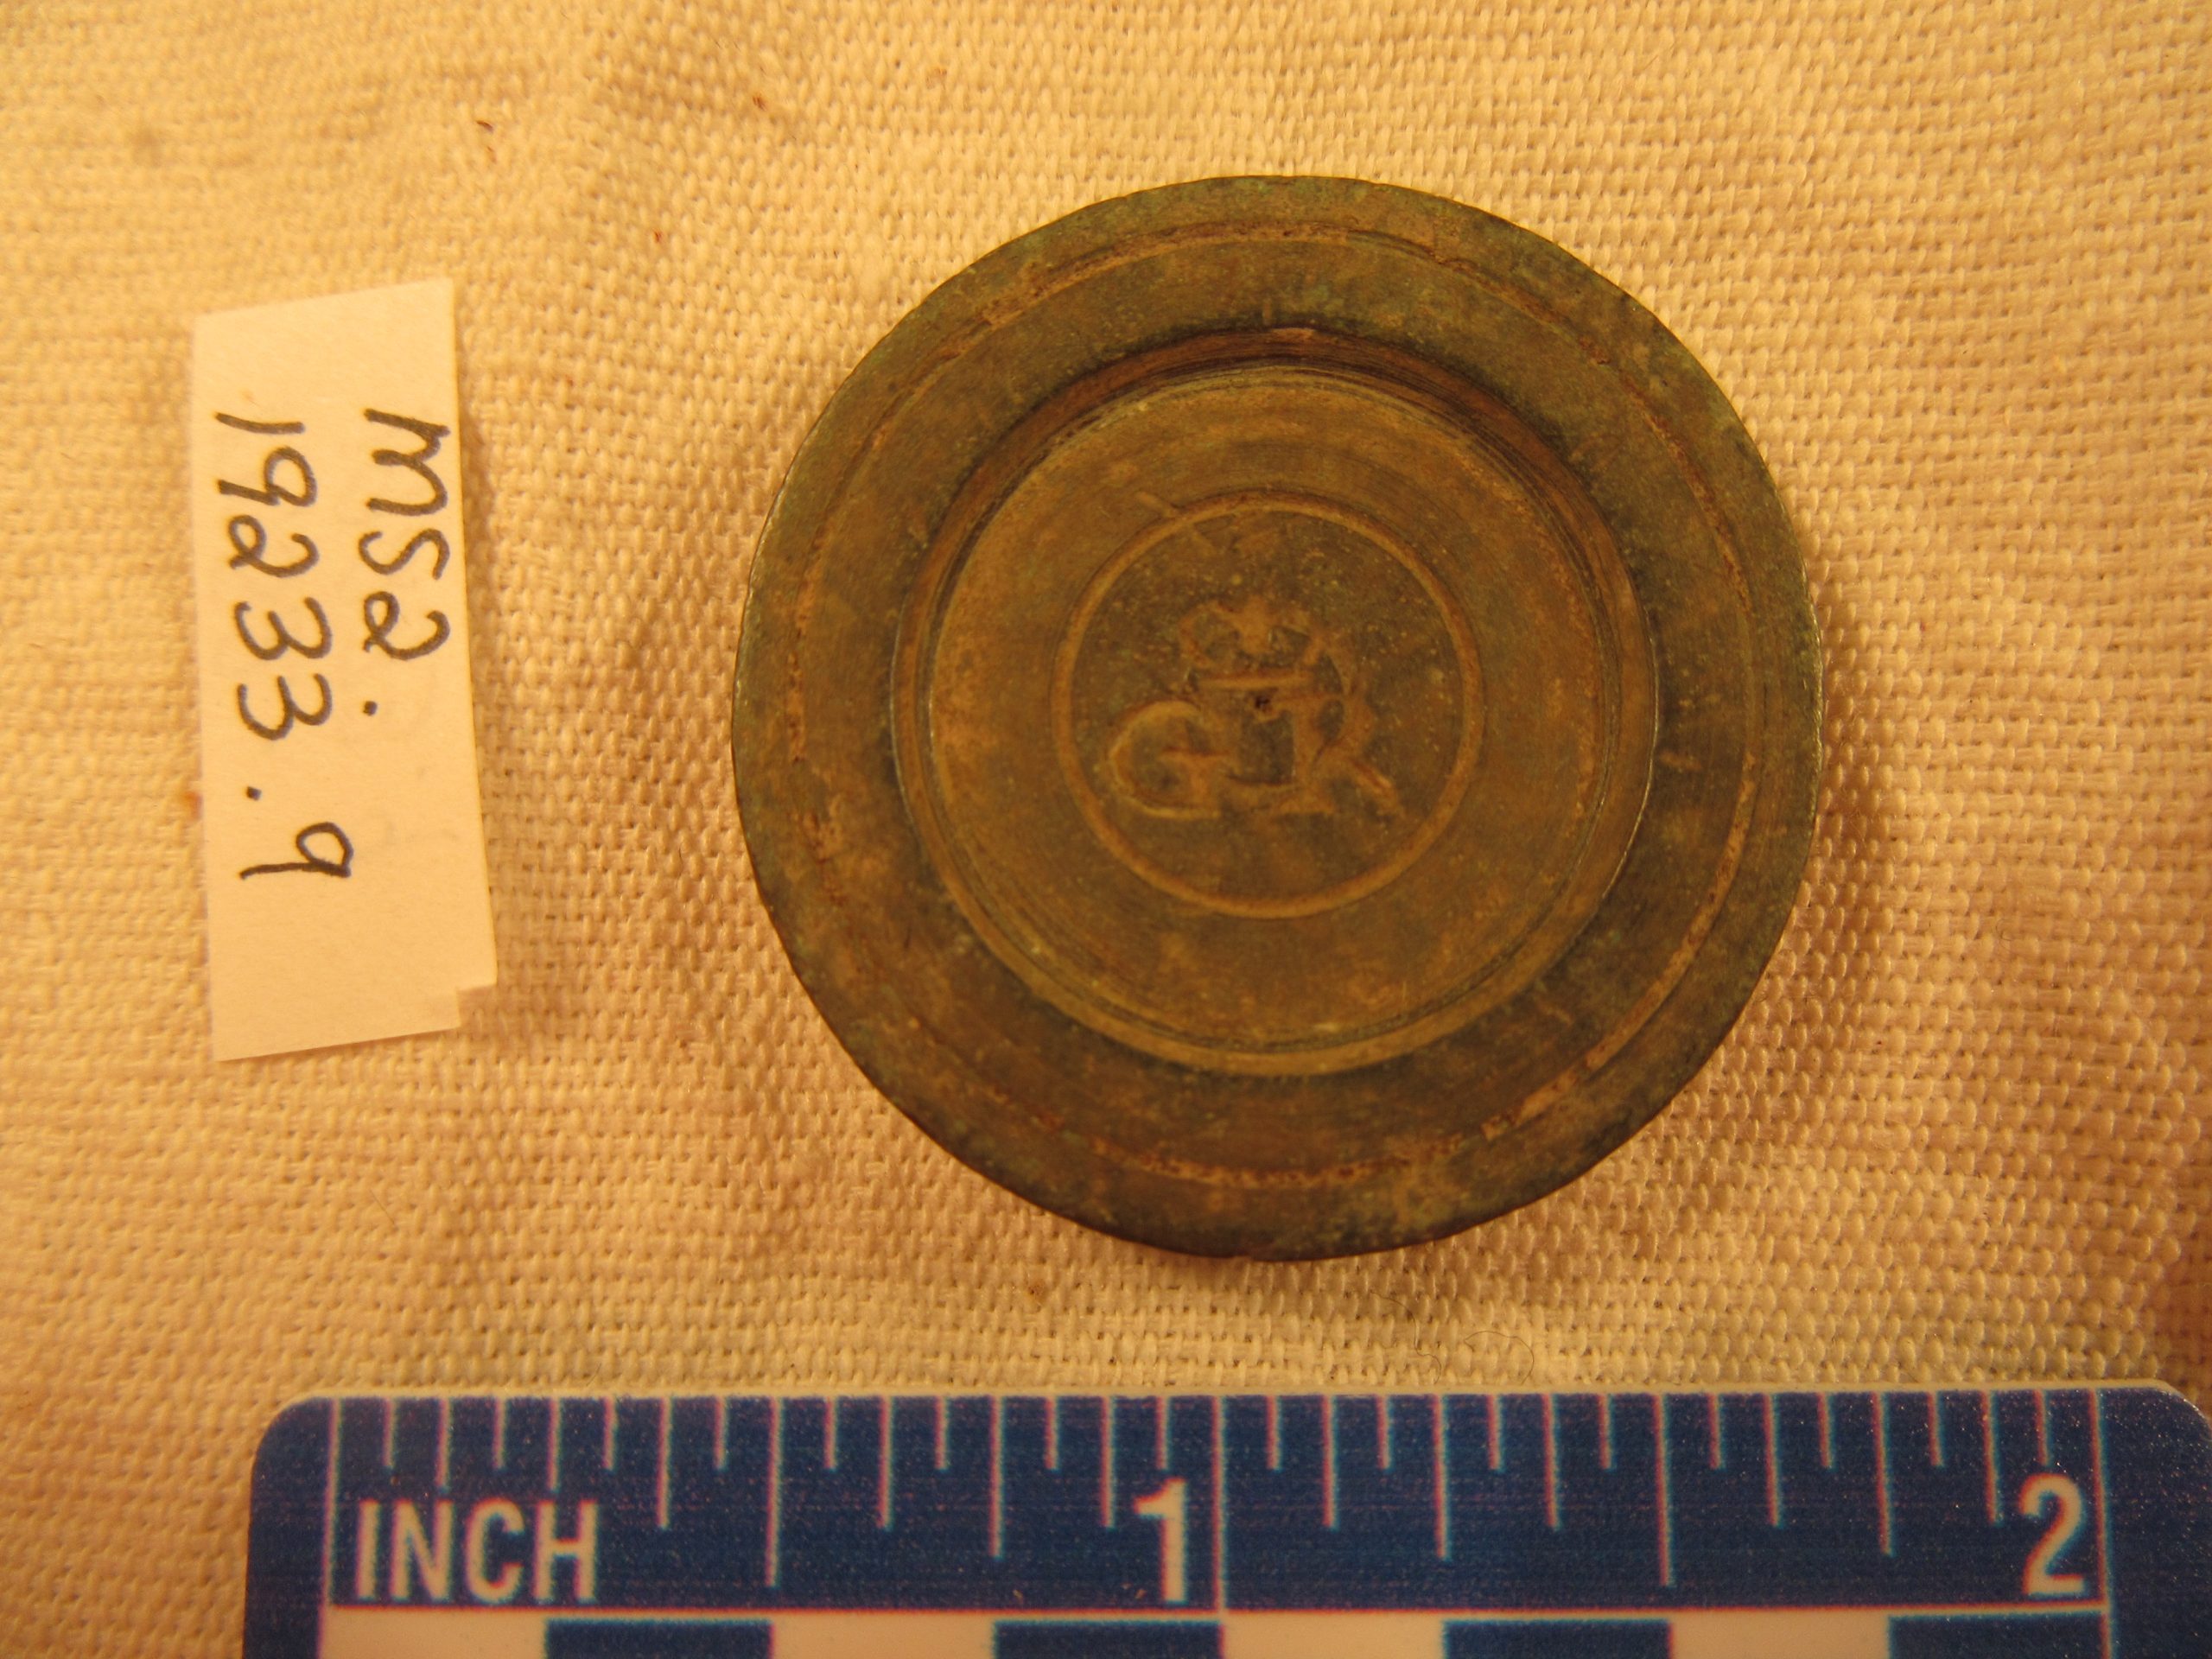 A brass weight with a ruler and collections number